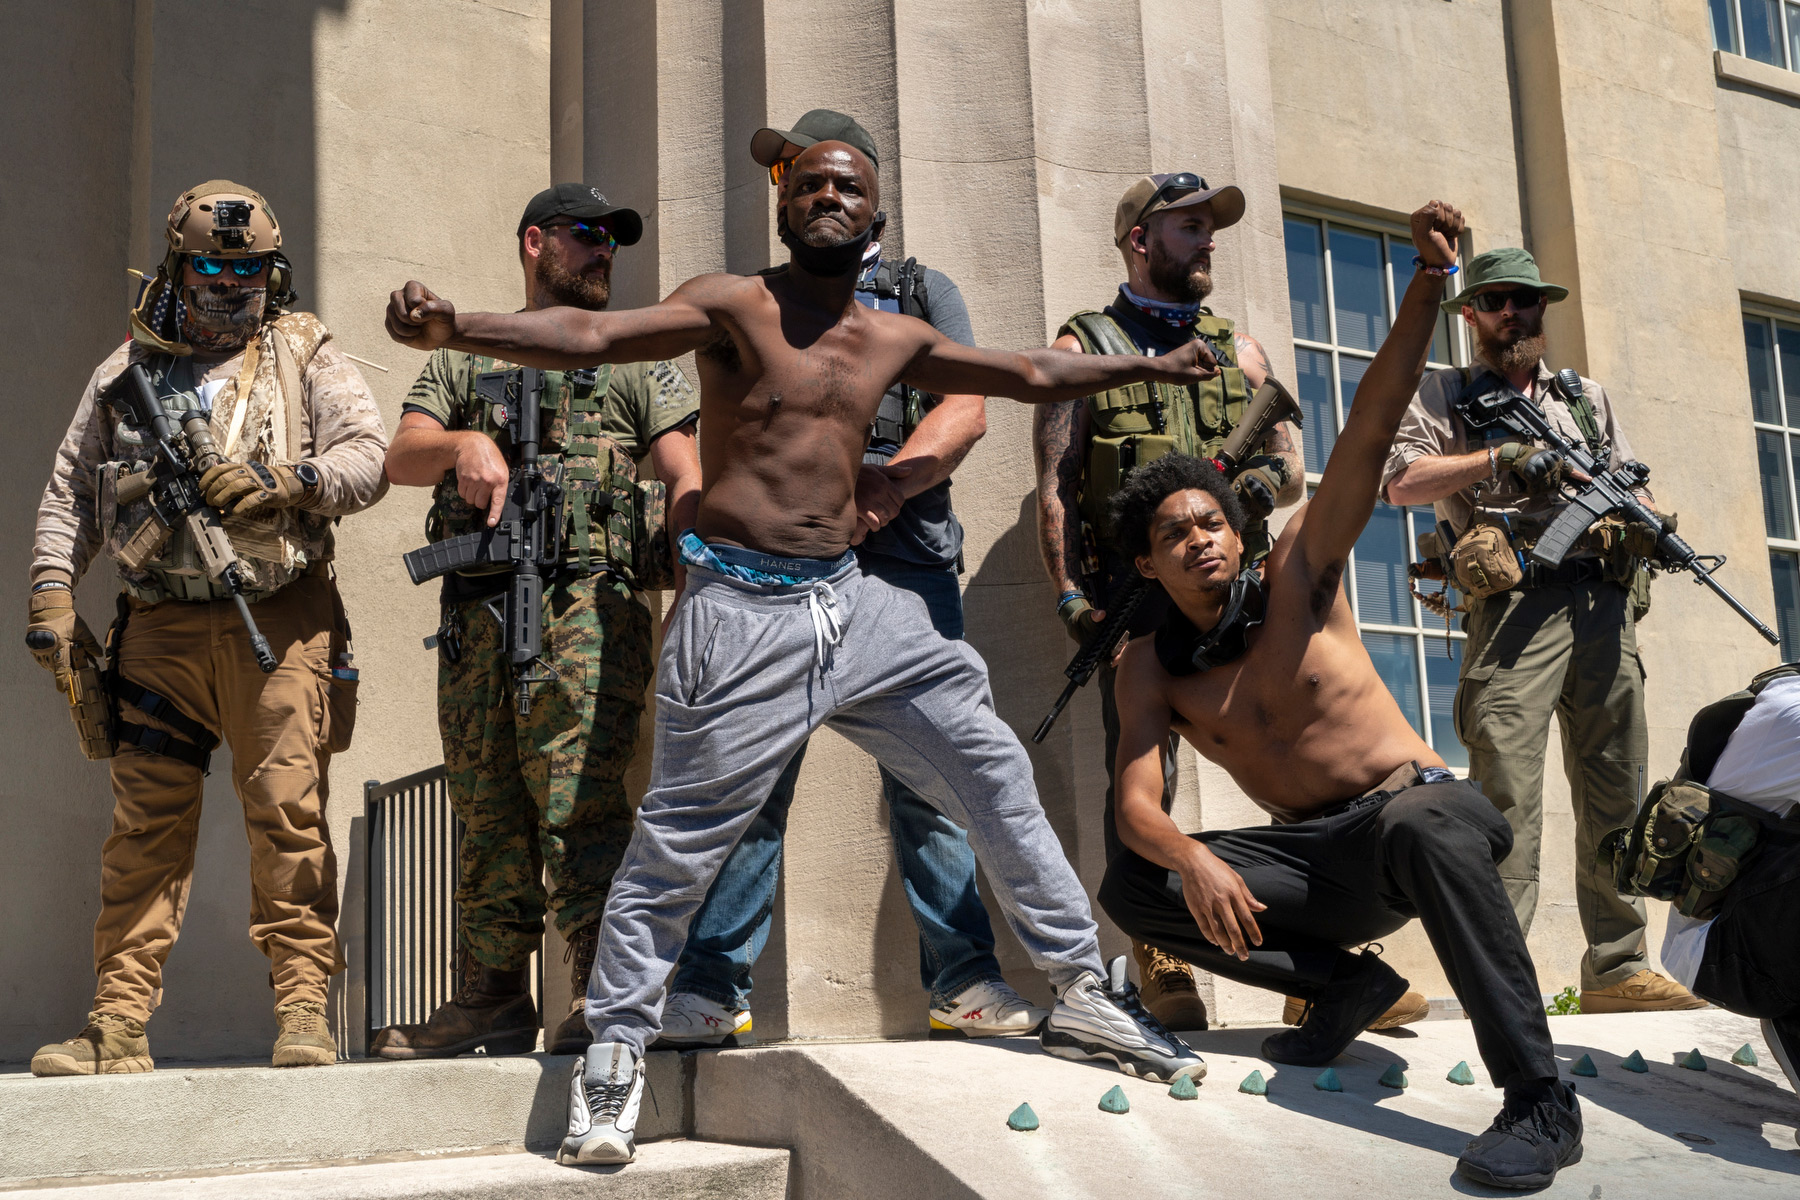 2020. Louisville, Kentucky. USA. A right wing militia gathers at Jefferson Square, the site of the Breonna Taylor memorial at Louisville.  Angry but ultimately nonviolent confrontations with BLM and NFAC ensued before the right wing militia pulled back.